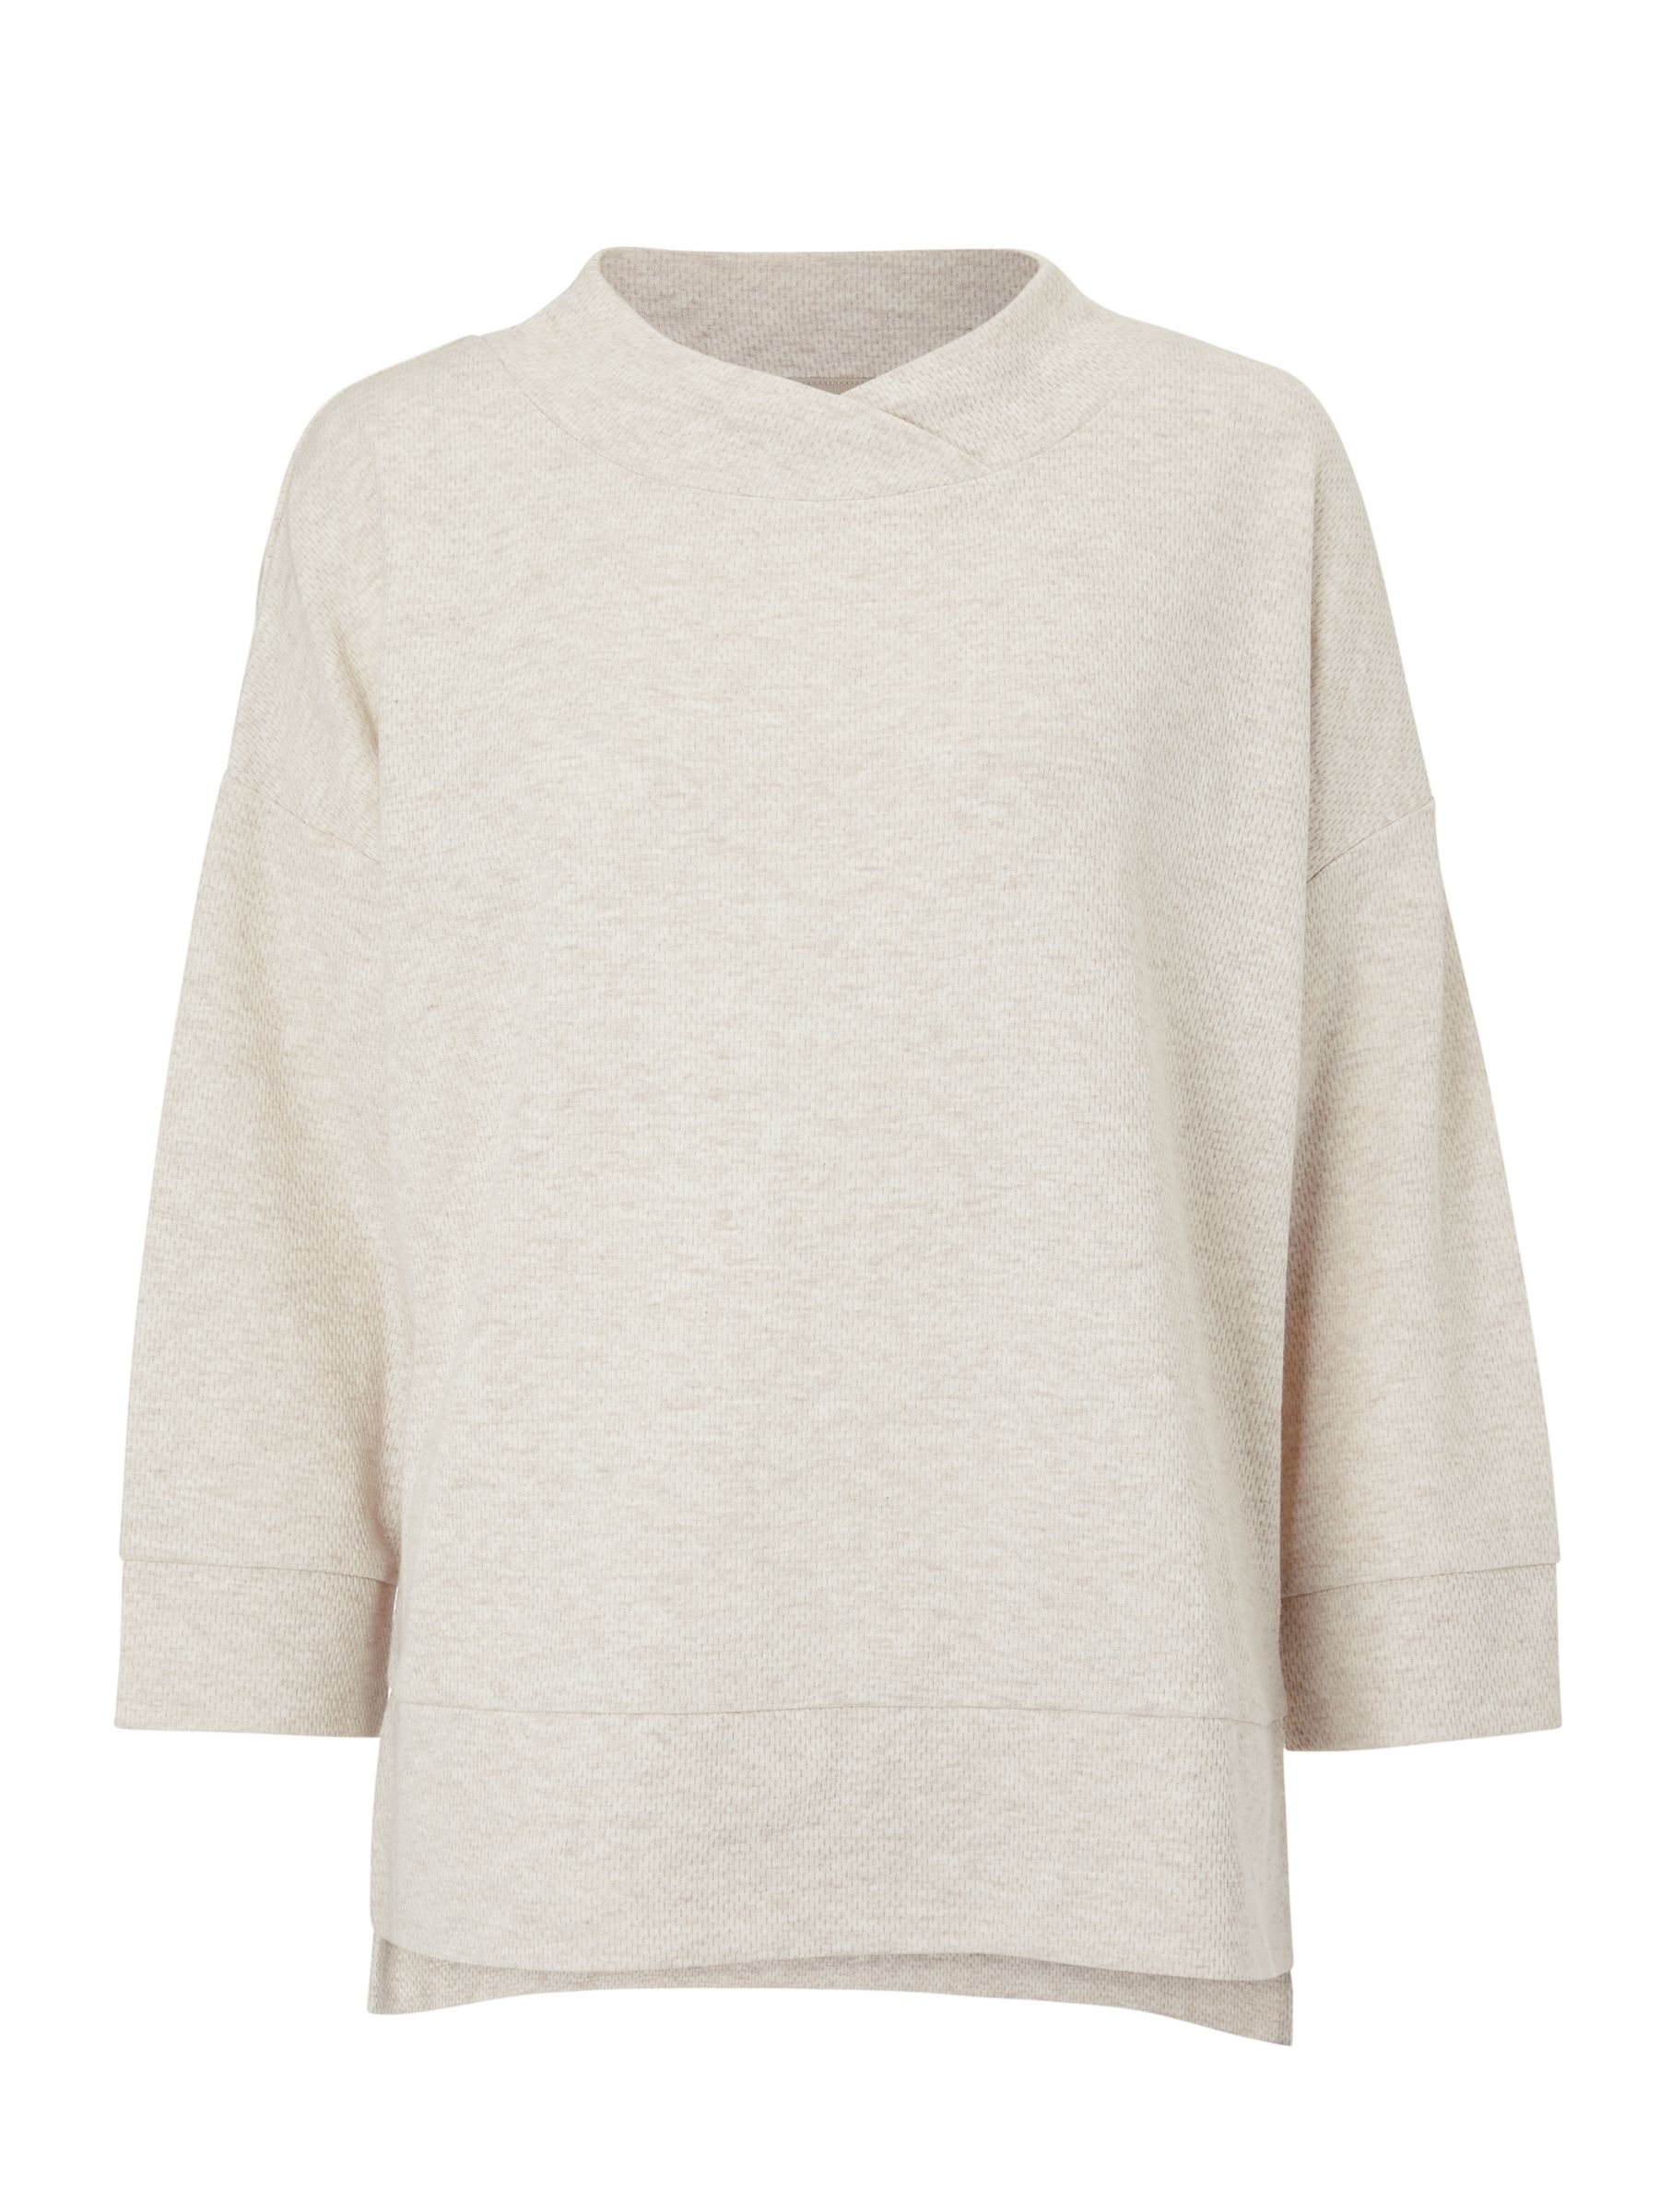 John Lewis & Partners Funnel Neck Textured Lounge Top, Neutral